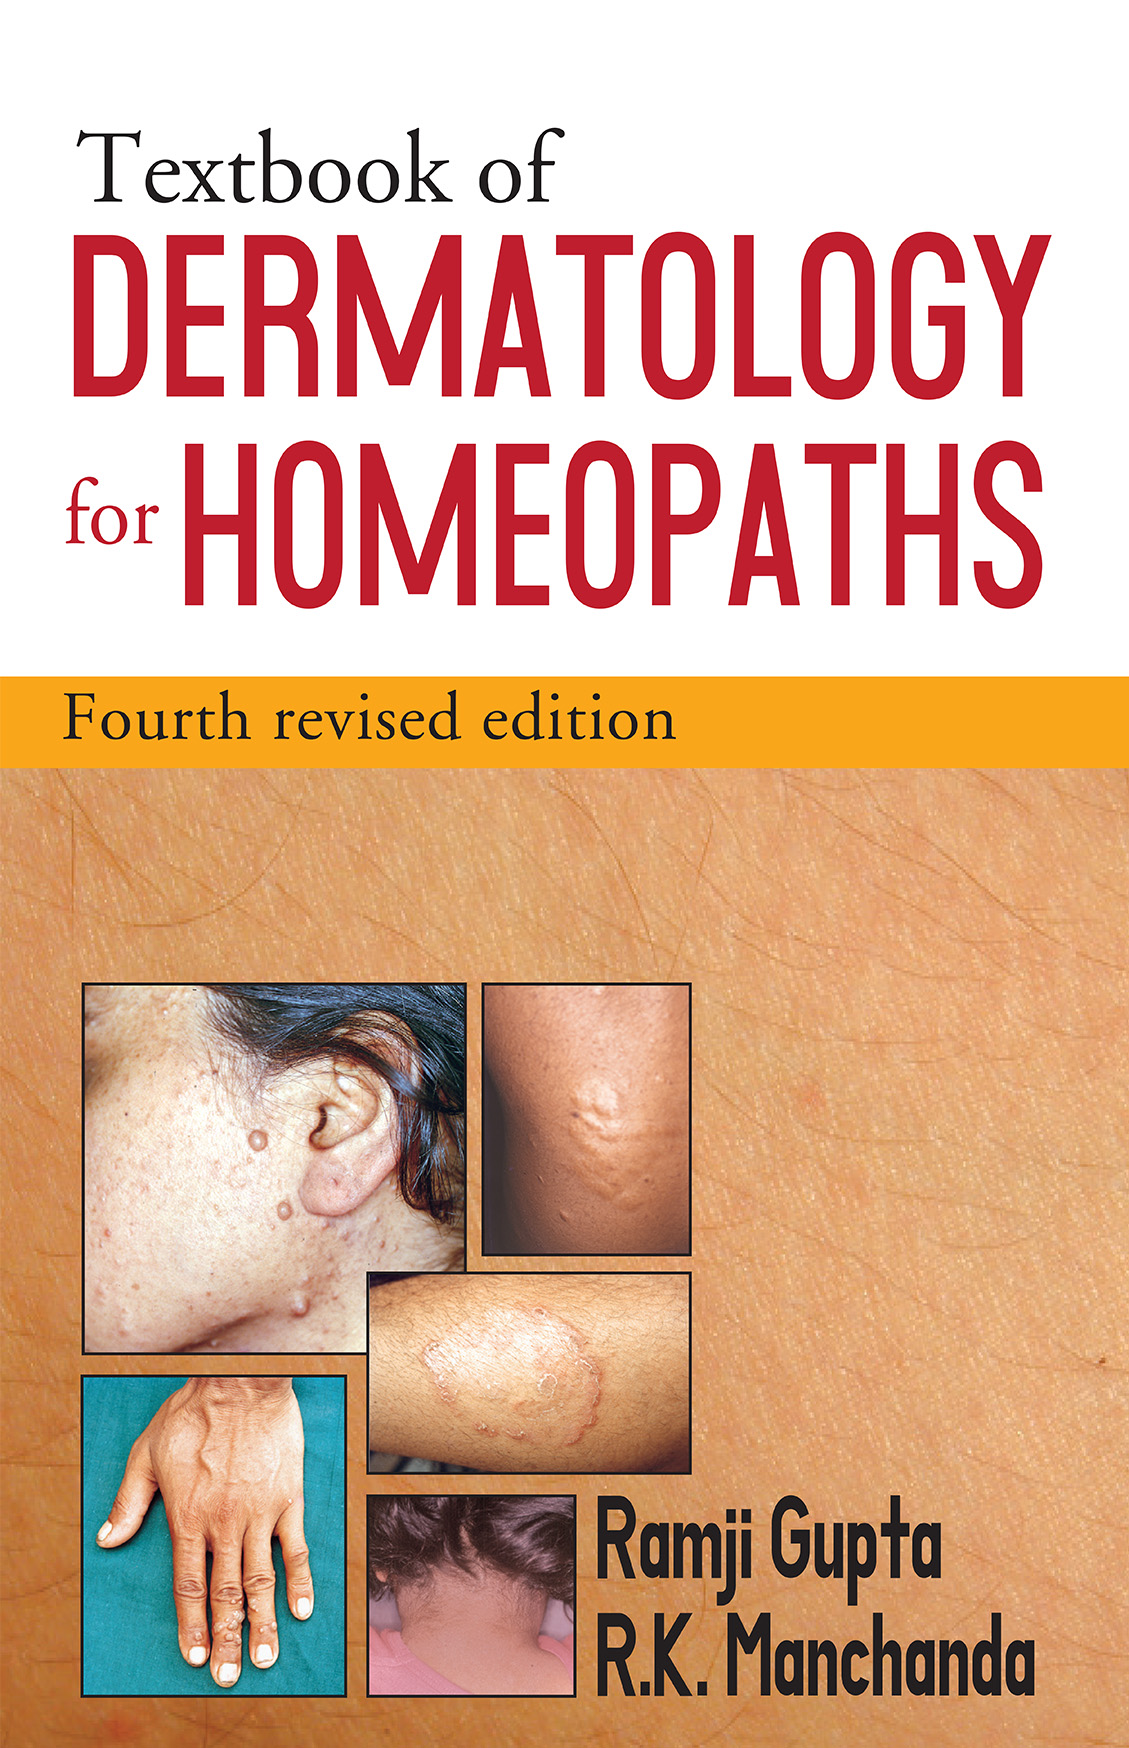 Textbook Of Dermatology For Homoeopaths